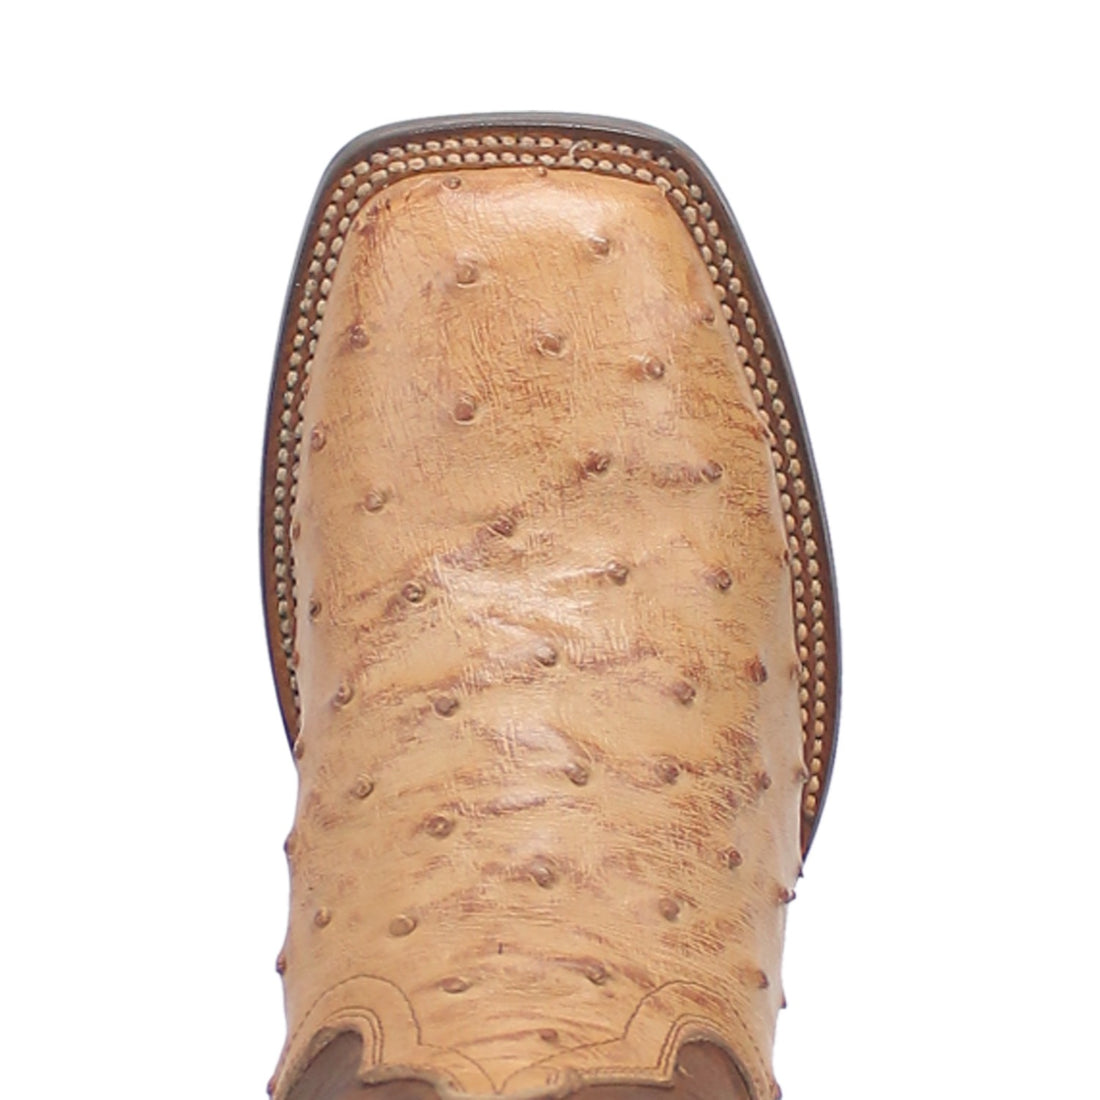 ALAMOSA FULL QUILL OSTRICH BOOT Preview #6